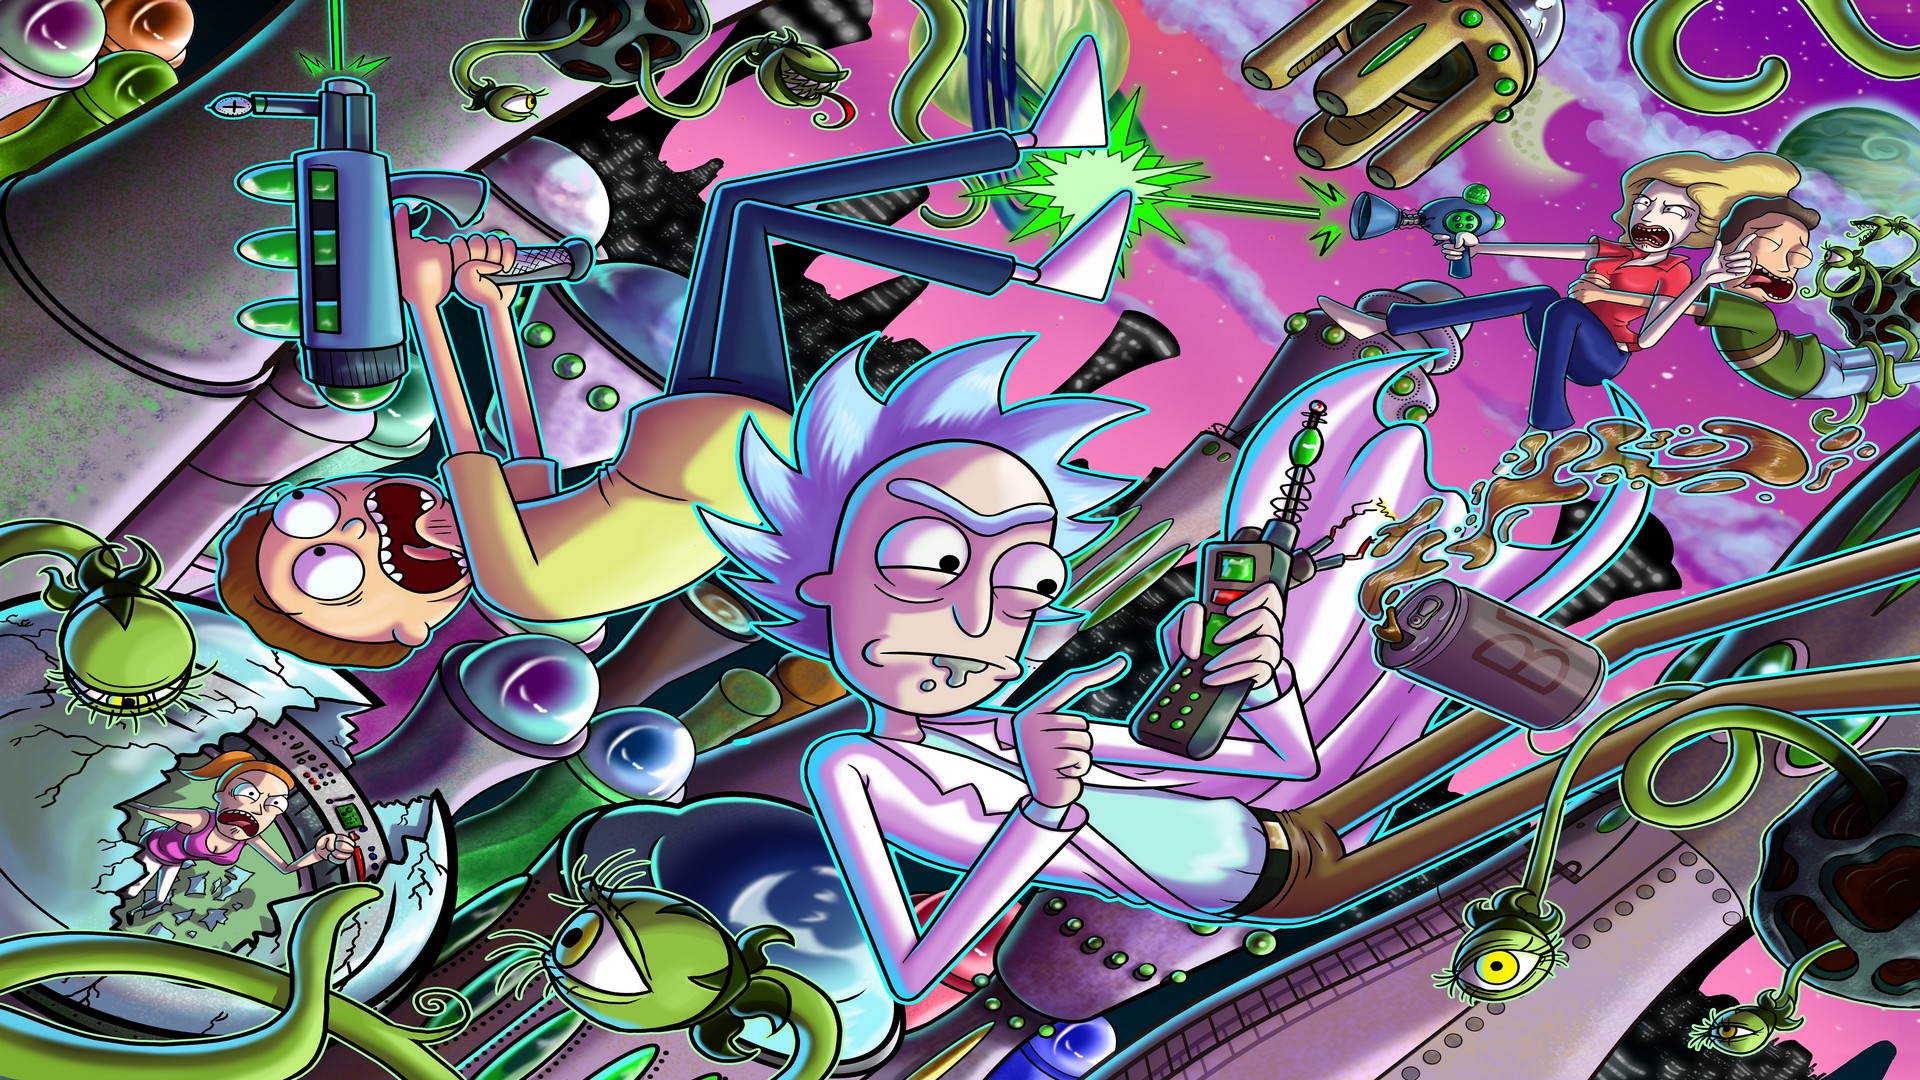 Desktop Wallpaper Cartoon Network Rick and Morty with resolution 1920X1080 pixel. You can use this wallpaper as background for your desktop Computer Screensavers, Android or iPhone smartphones